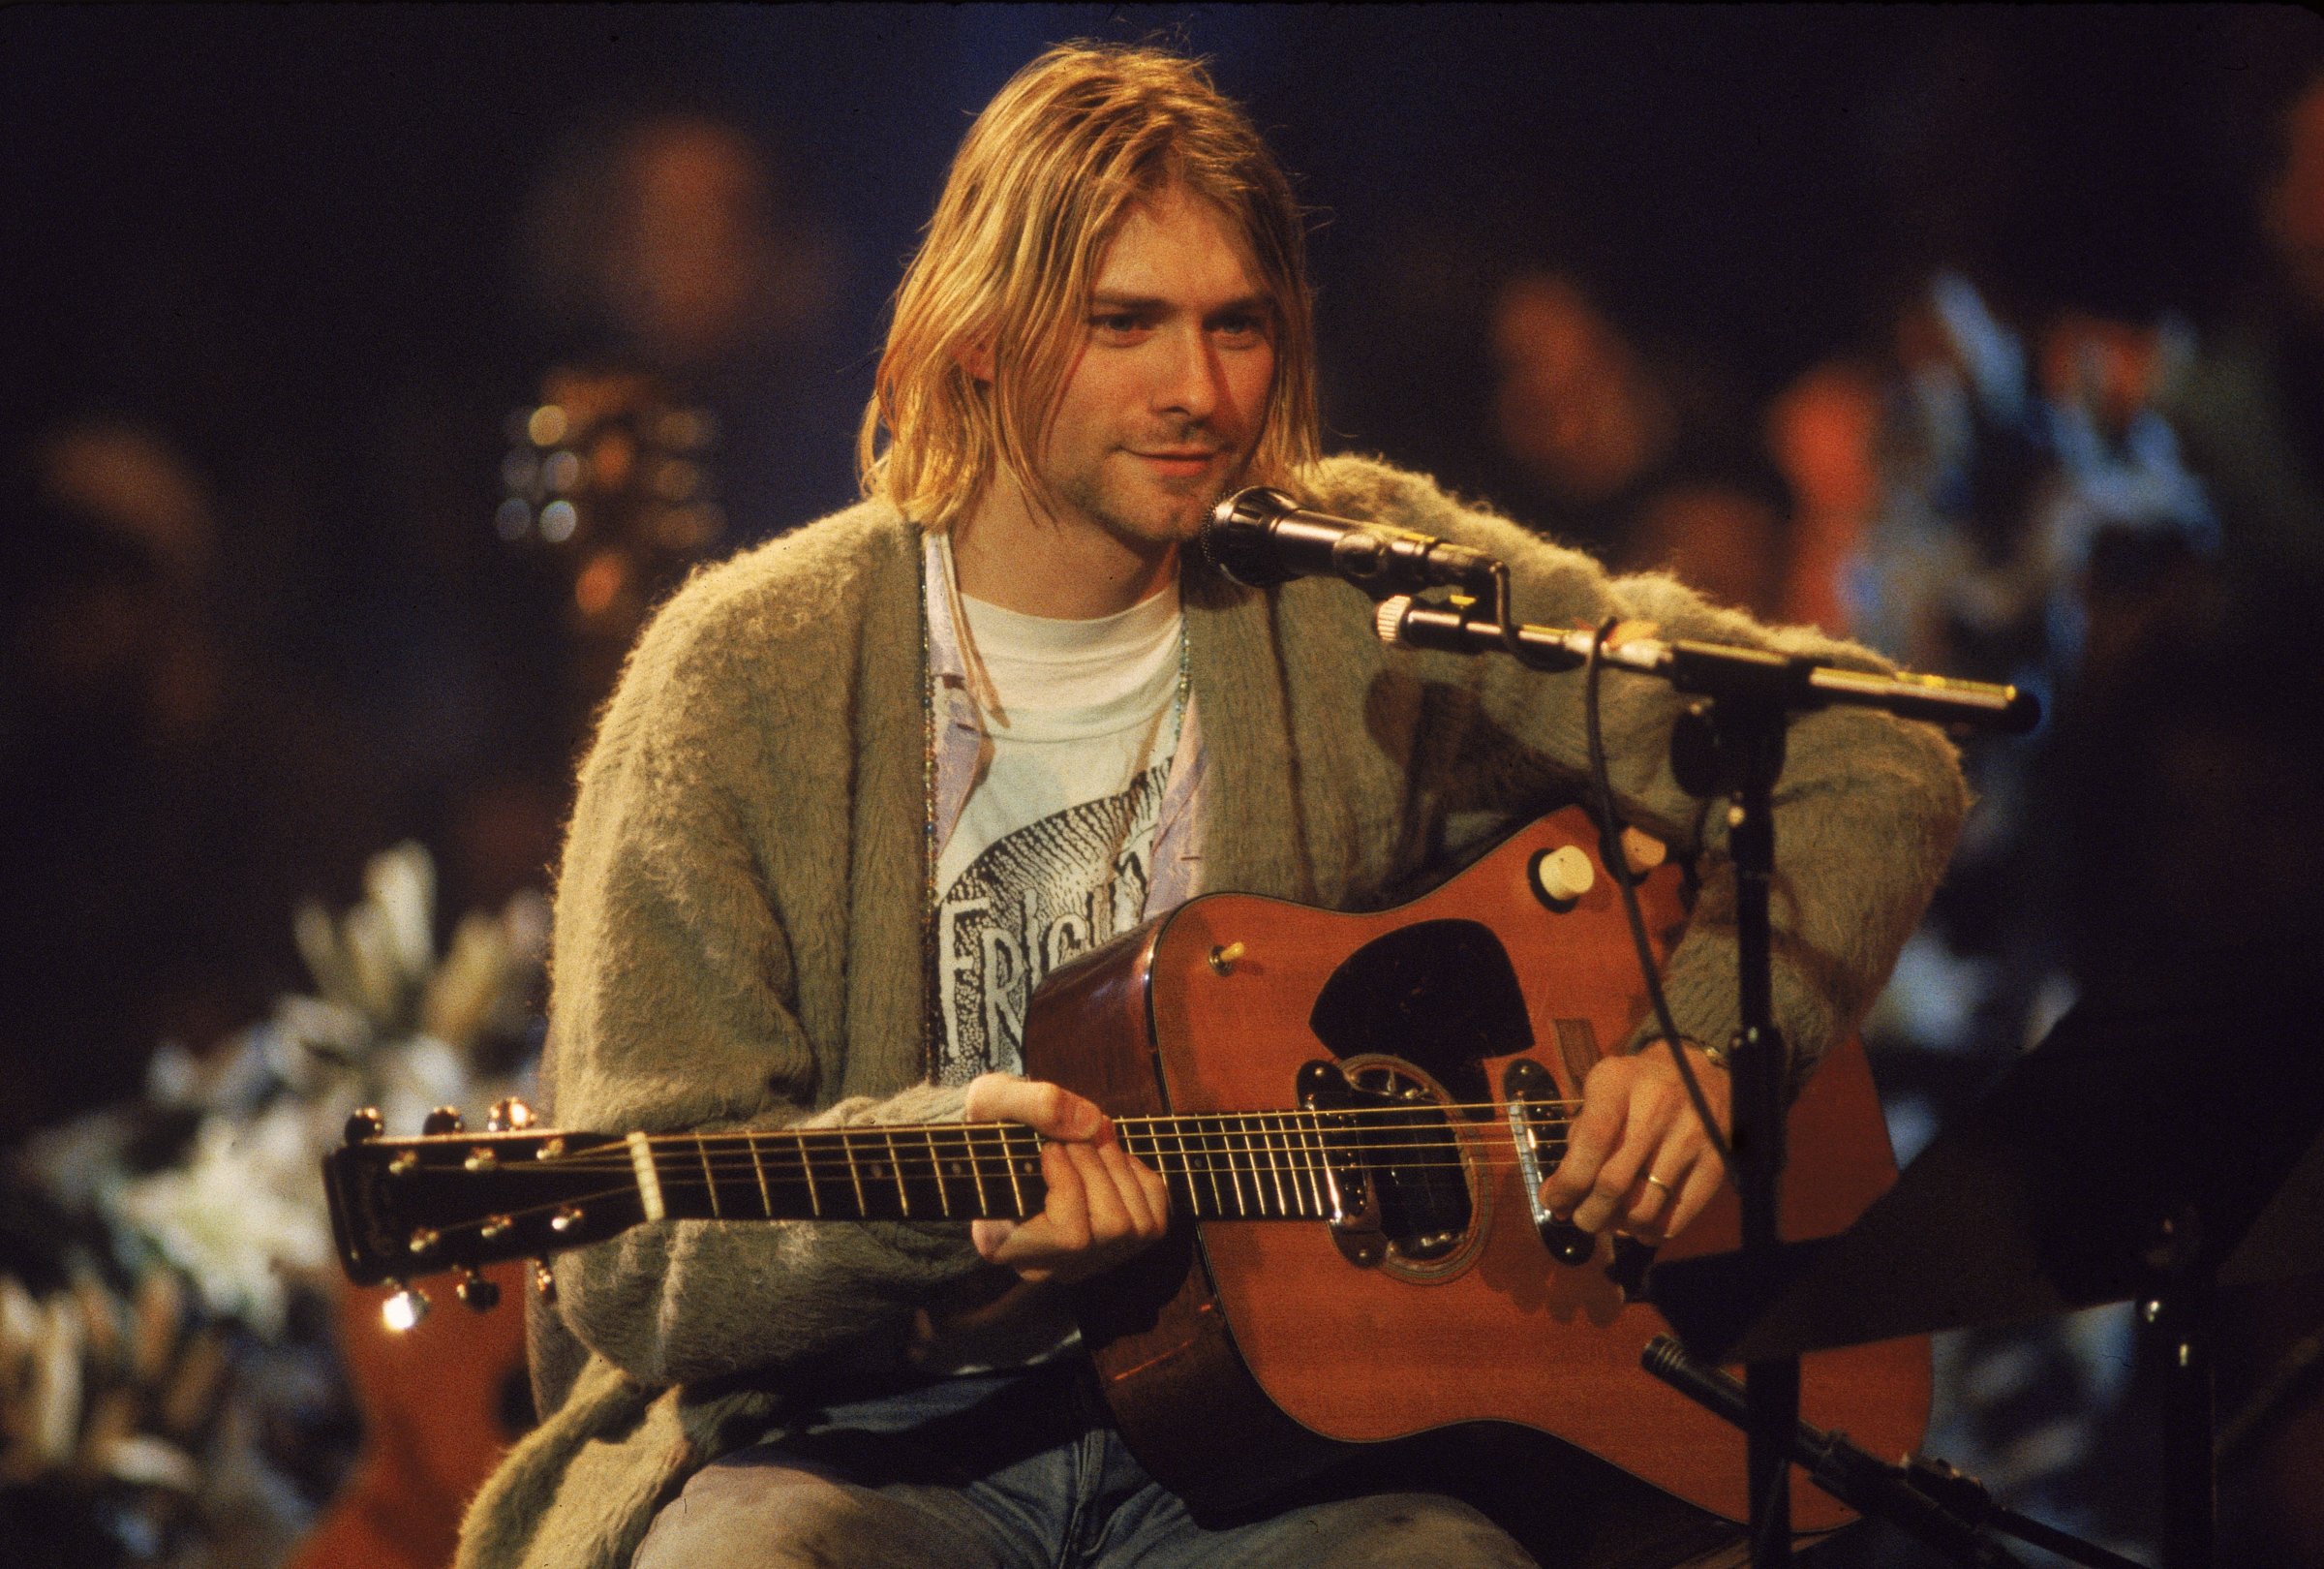 Kurt Cobain performs with Nirvana during a taping of MTV Unplugged on Nov. 18, 1993 in New York City.